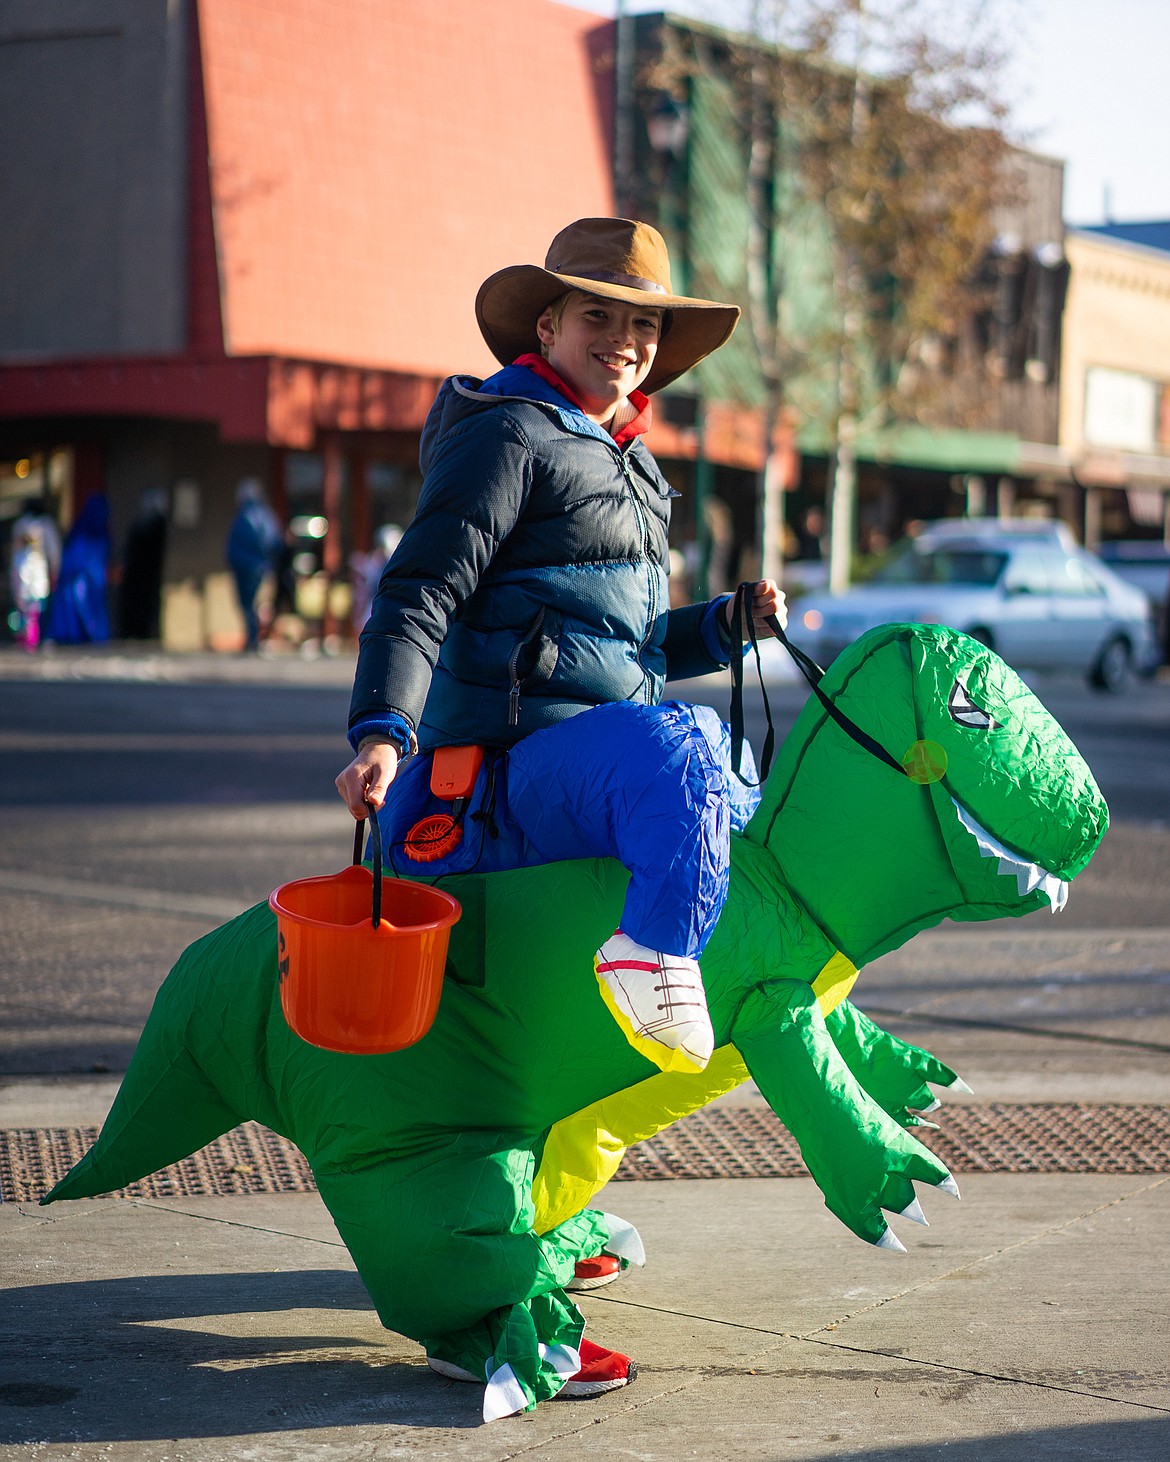 Having tamed a T-Rex, a boy begins his hunt for candy during the Whitefish Trick or Treat downtown on Thursday. (Daniel McKay/Whitefish Pilot)